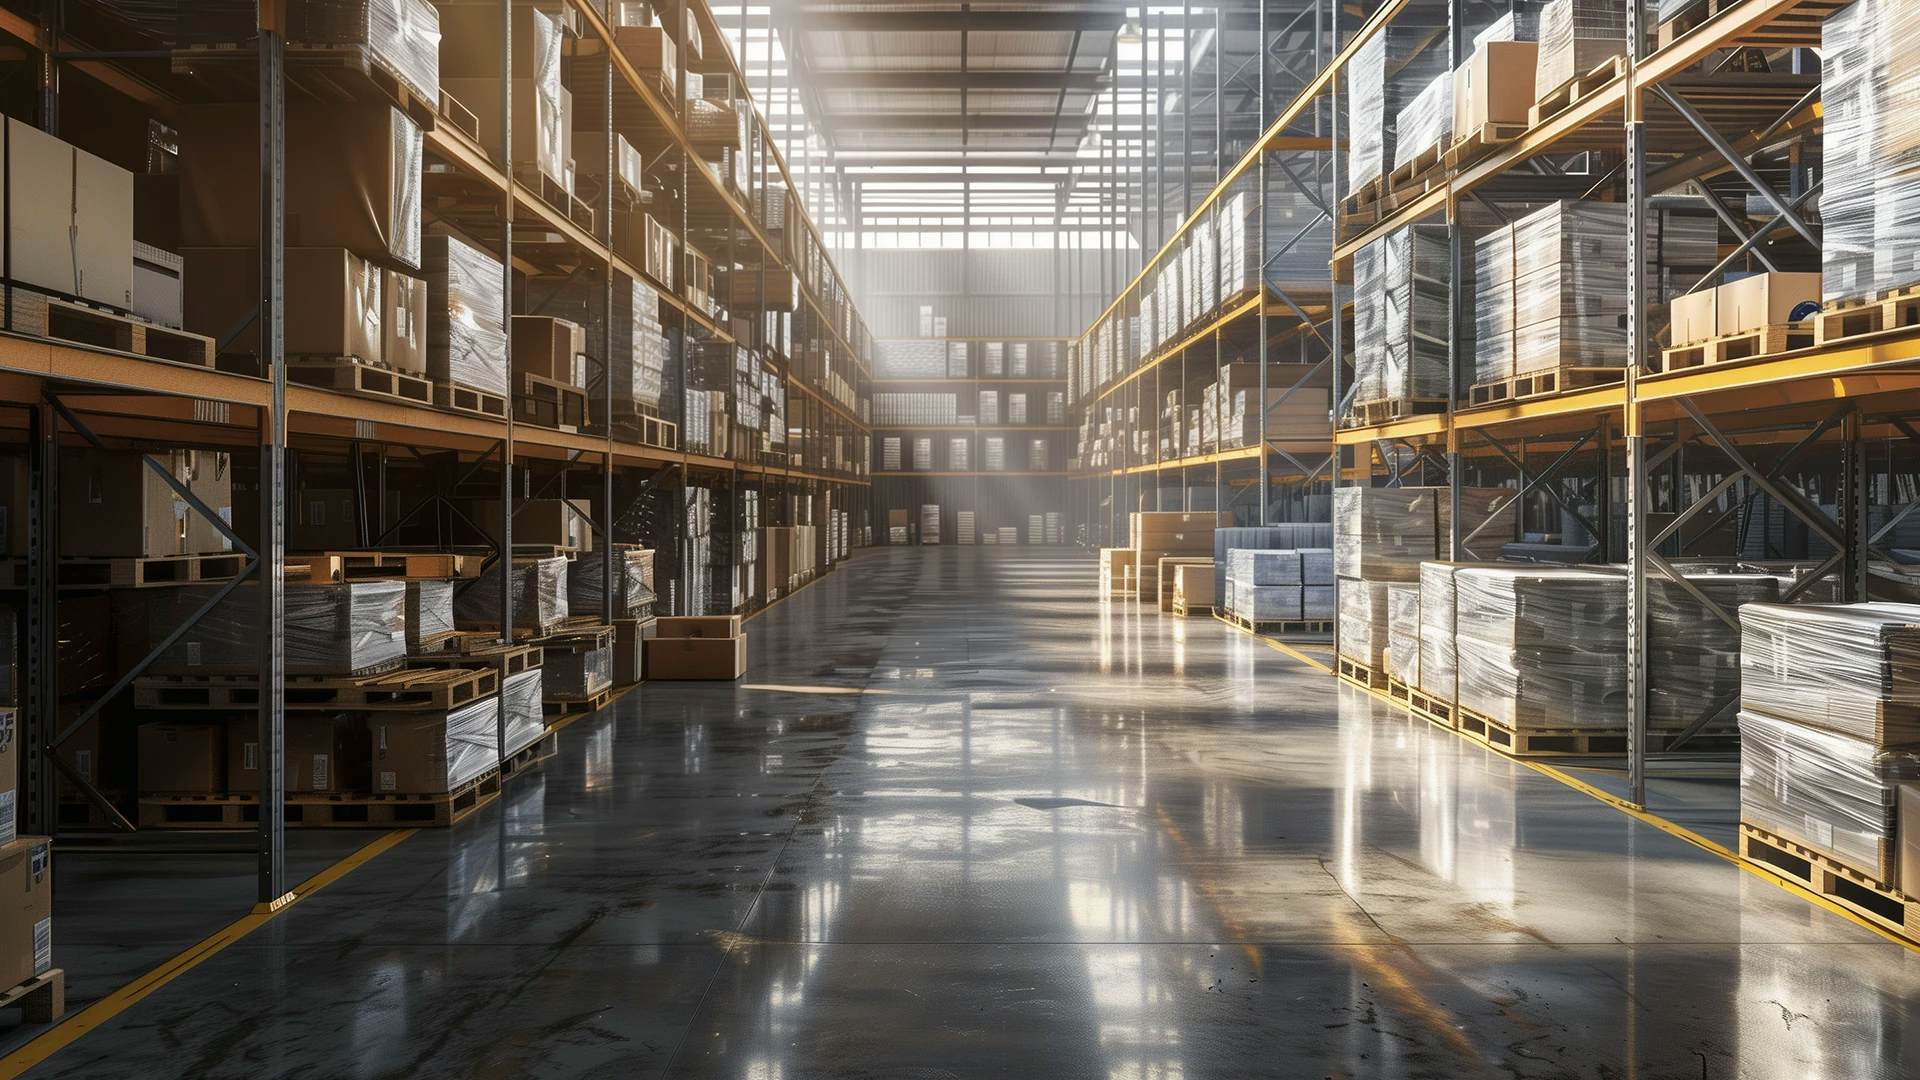 Sunlight filters through high windows onto the glossy floor of a spacious warehouse, illuminating rows of metal shelving stocked with neatly wrapped pallets, suggesting an organized and efficient inventory system.